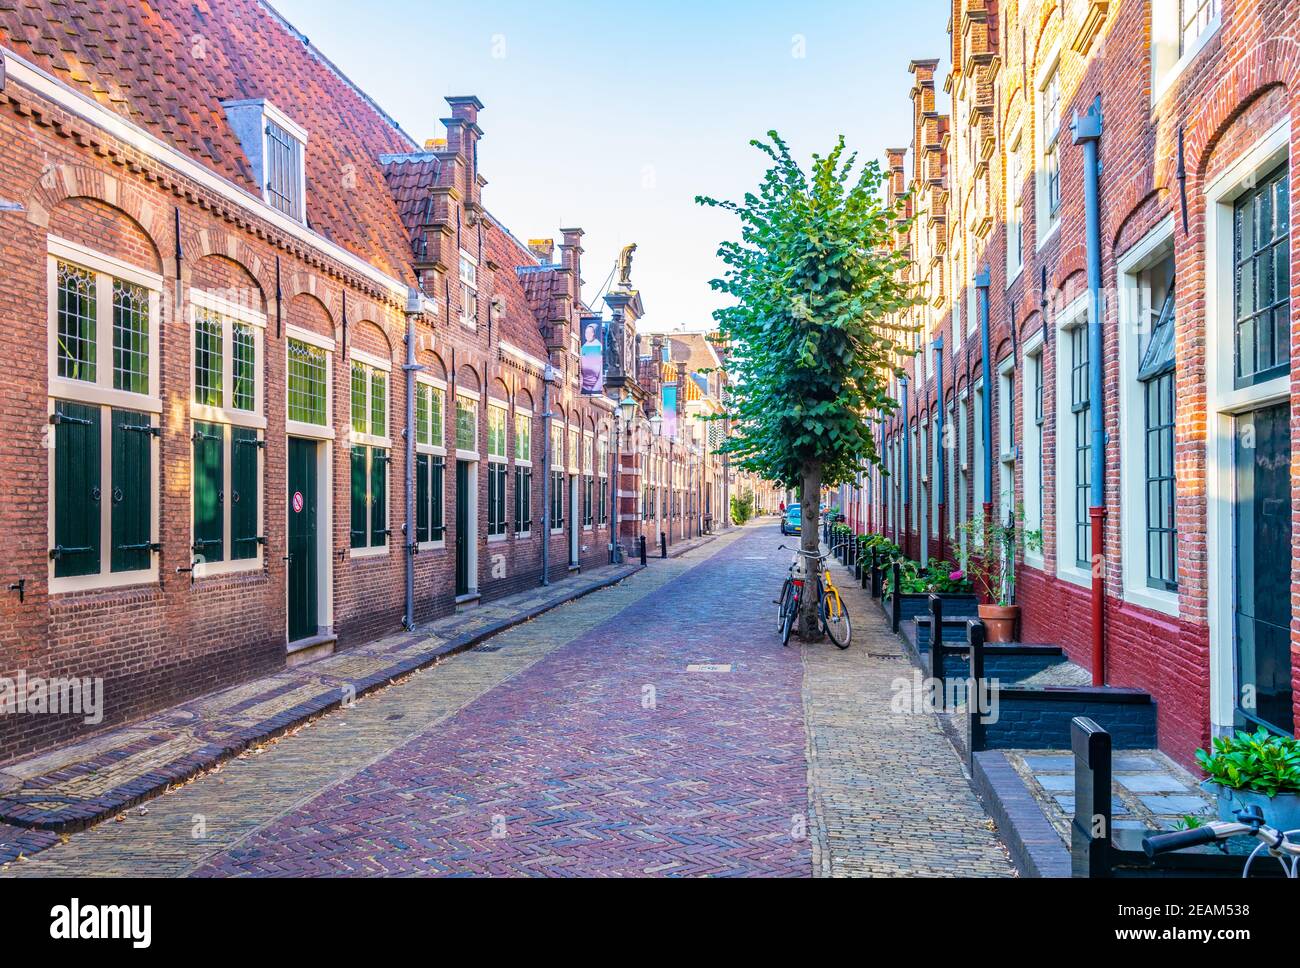 Frank Hals museum in the center of Haarlem, Netherlands Stock Photo